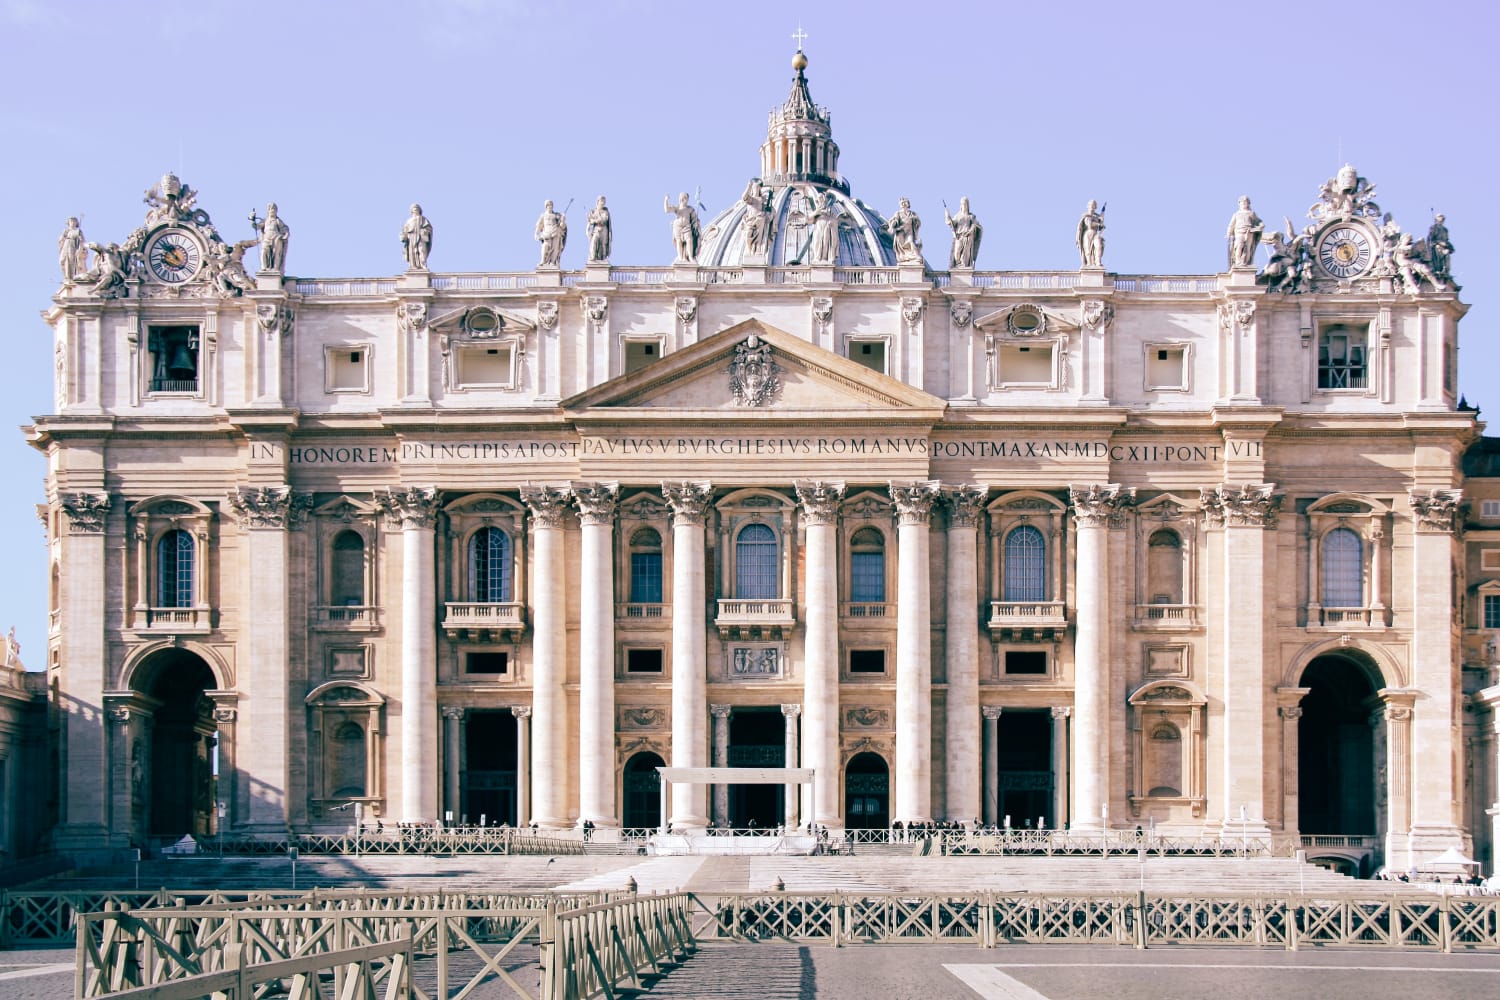 Facade of The Papal Basilica of St. Peter in the Vatican (Photo credit to iam_os)